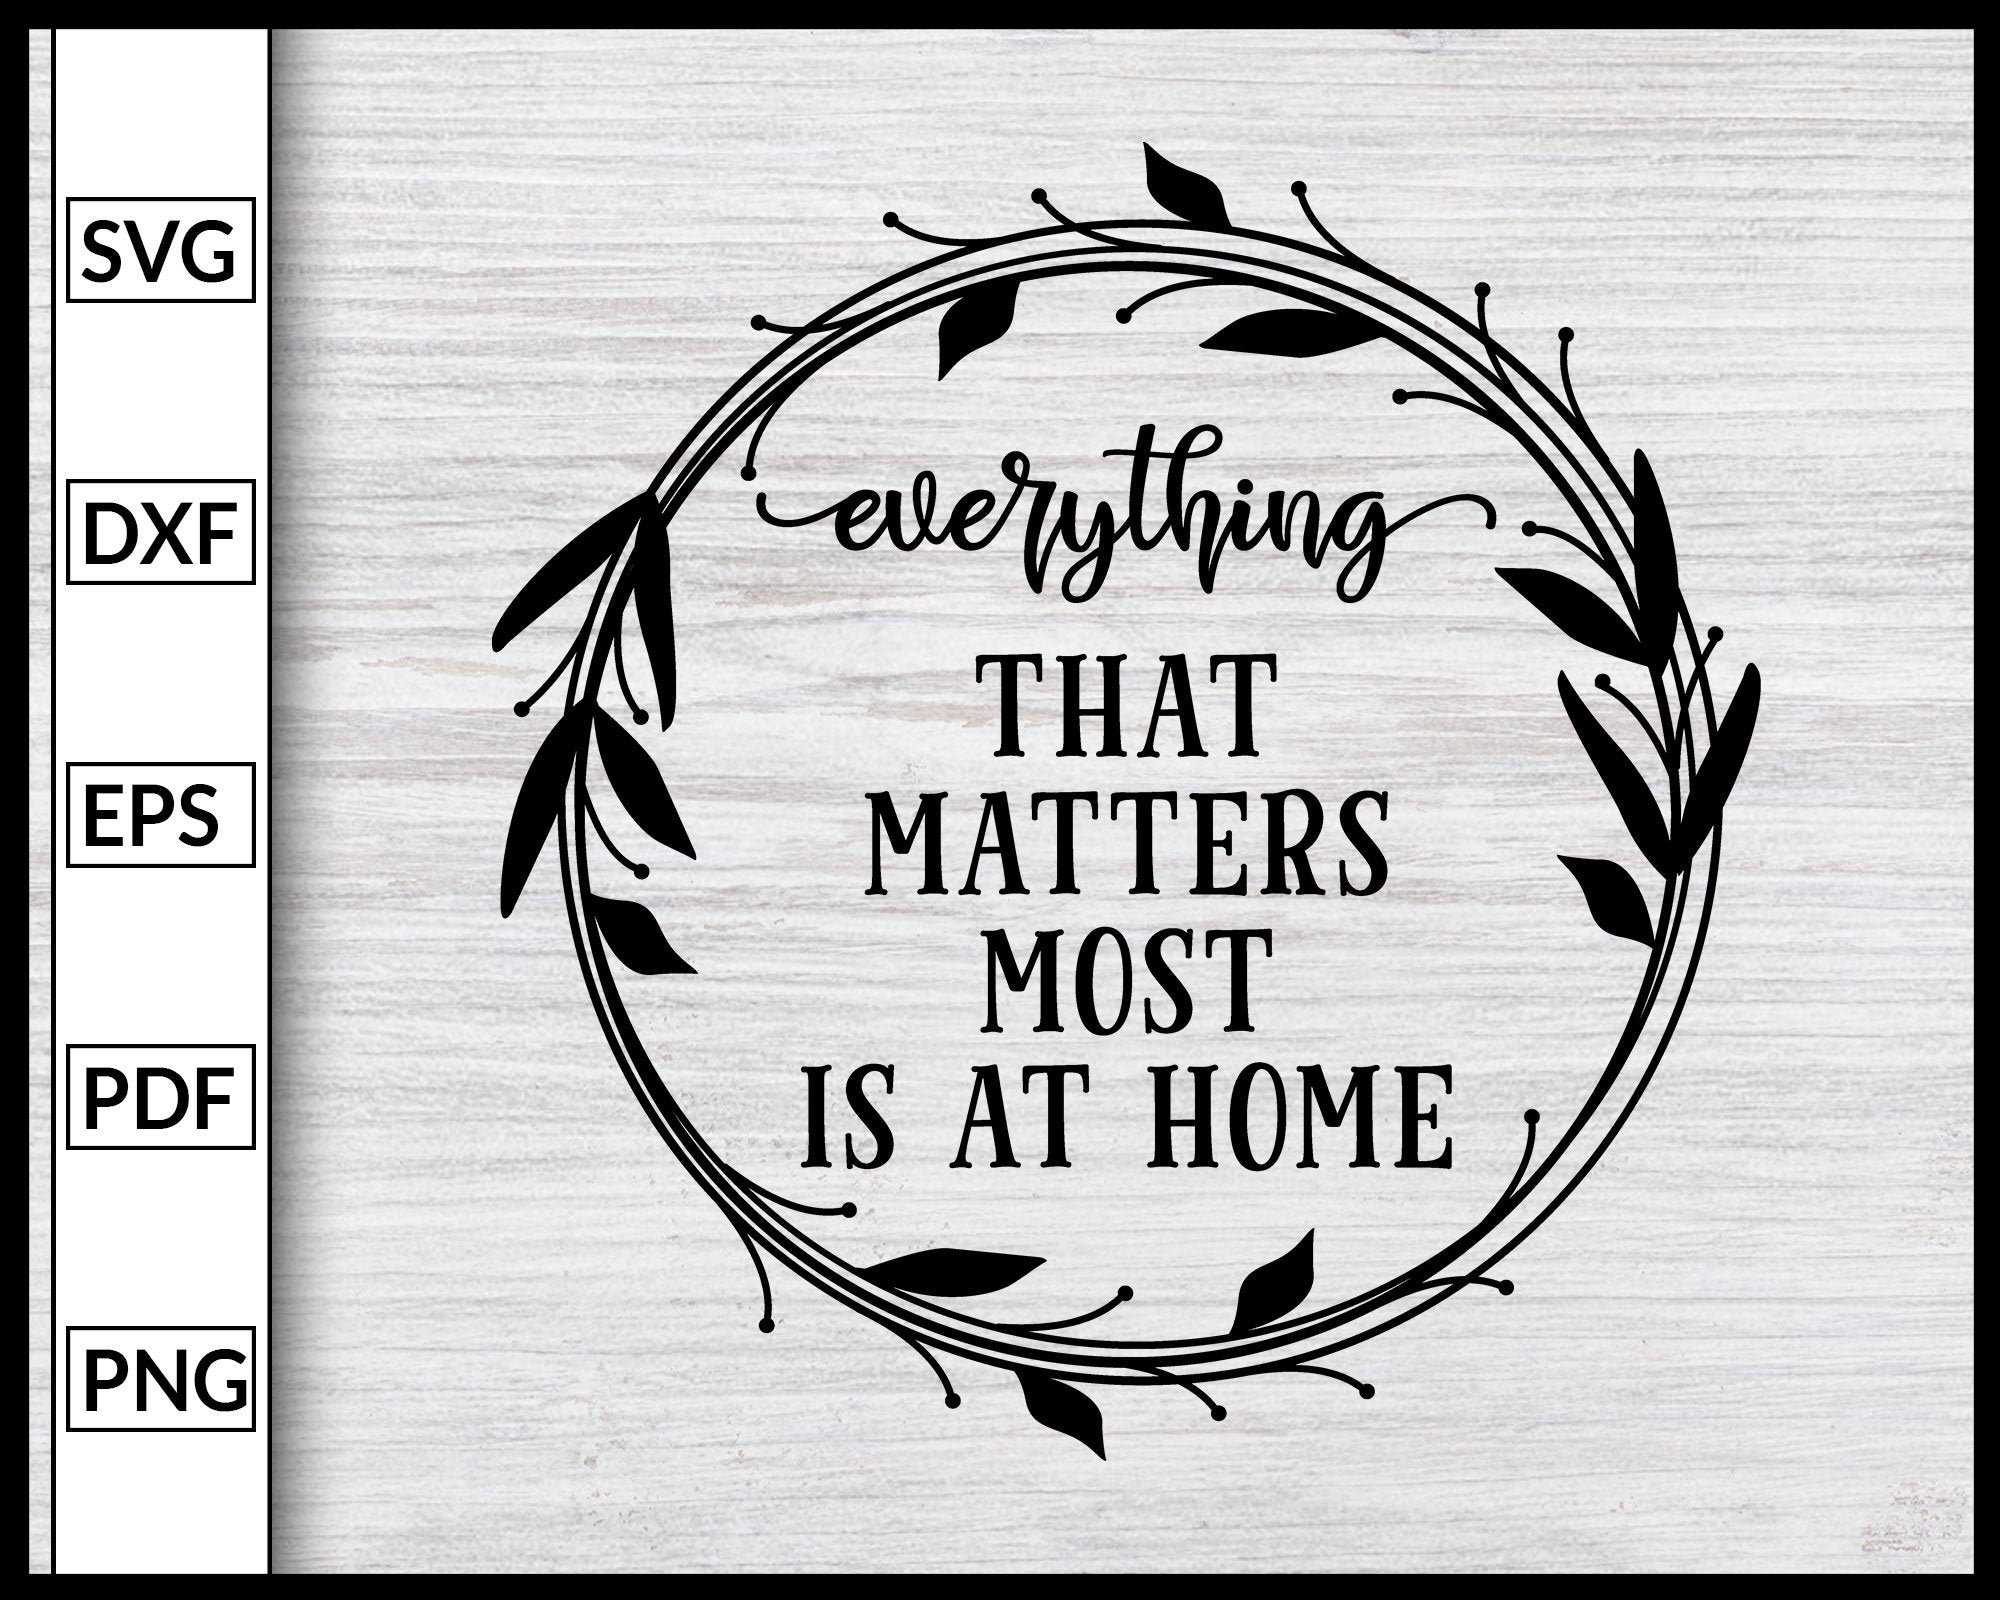 Download Home Svg Inspirational Quotes Svg Family Quotes Svg Cut File For Cricu Editable Svg File